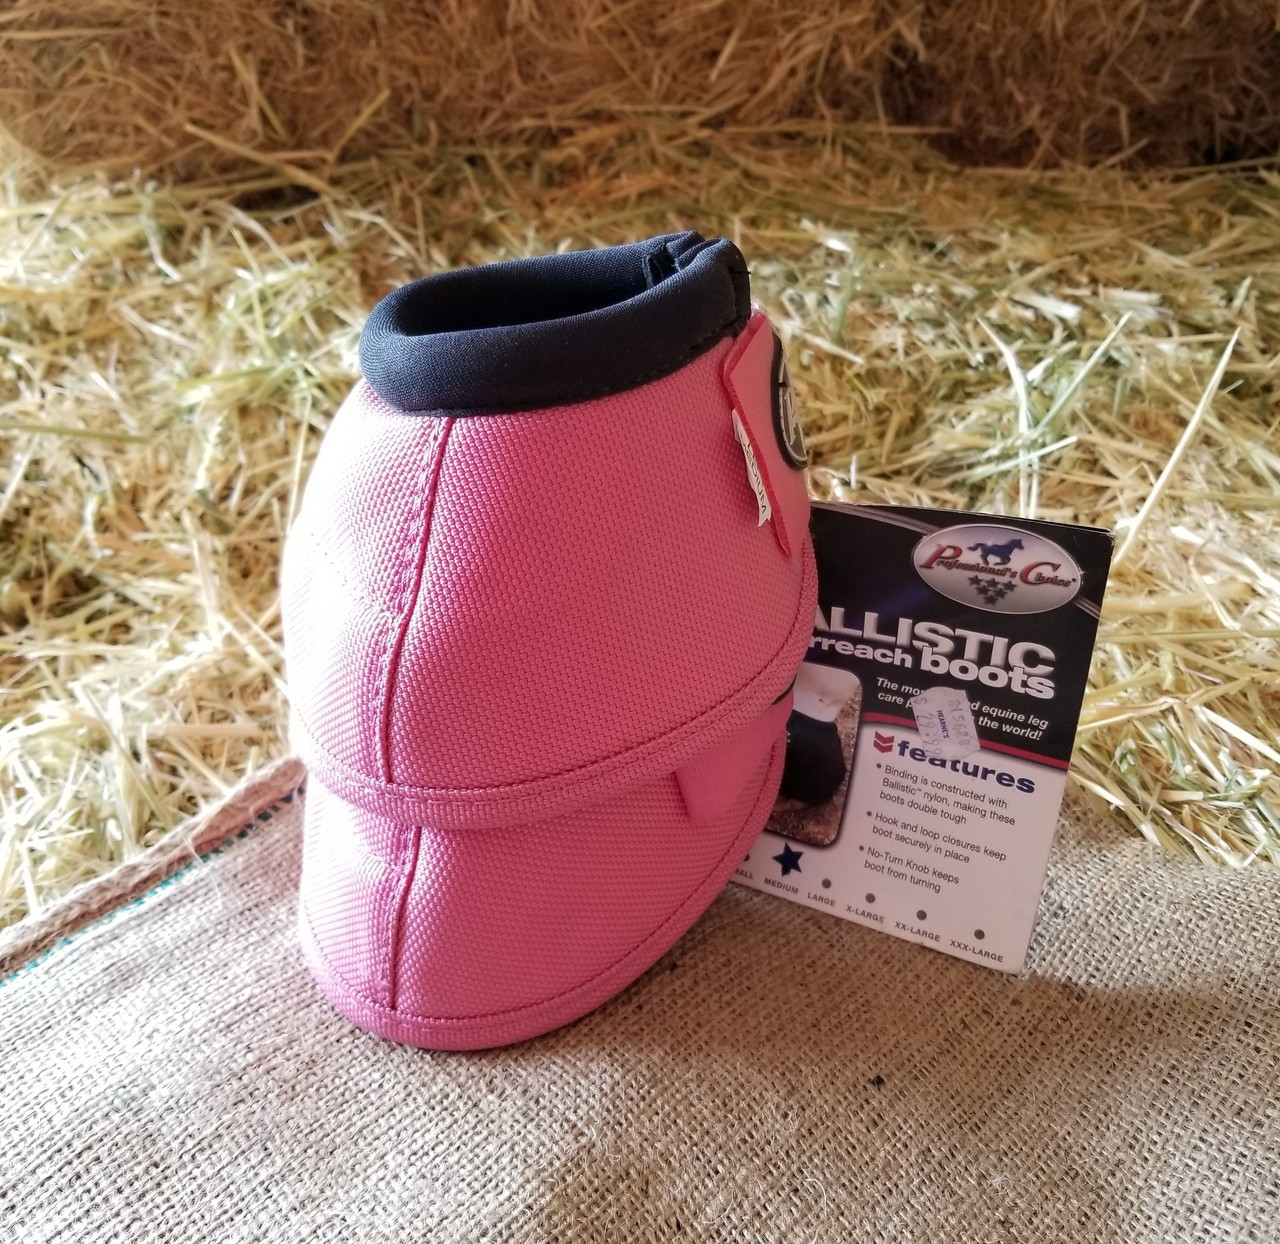 Overreach Boots Horse Boots for sale